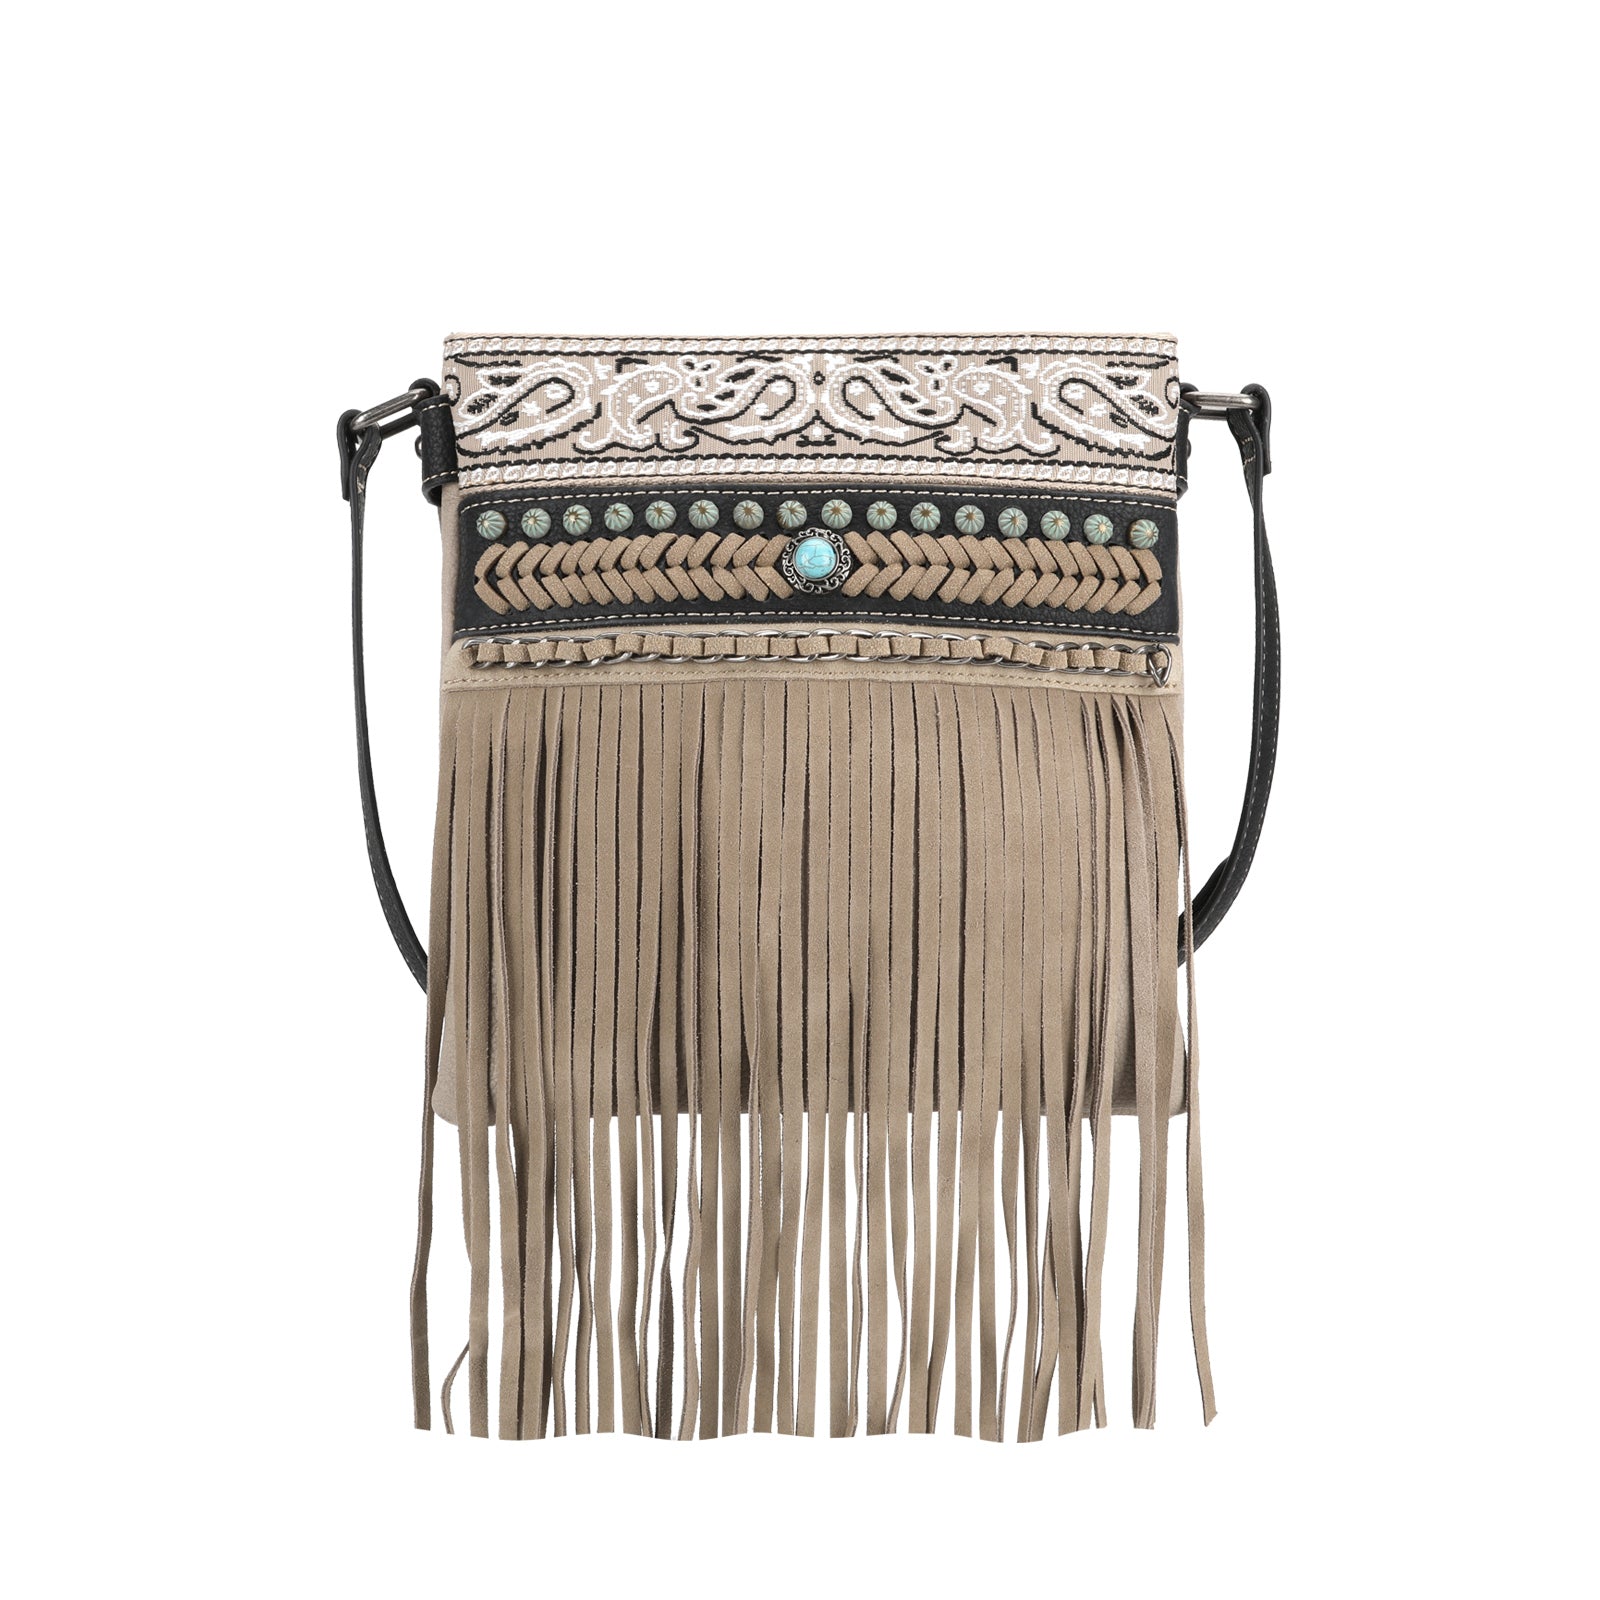 Leather Cowhide Purse With Fringe Large Tote With Sunflower Tooled Strap Western  Leather Handbag Crossbody Shoulder FREE SHIPPING - Etsy